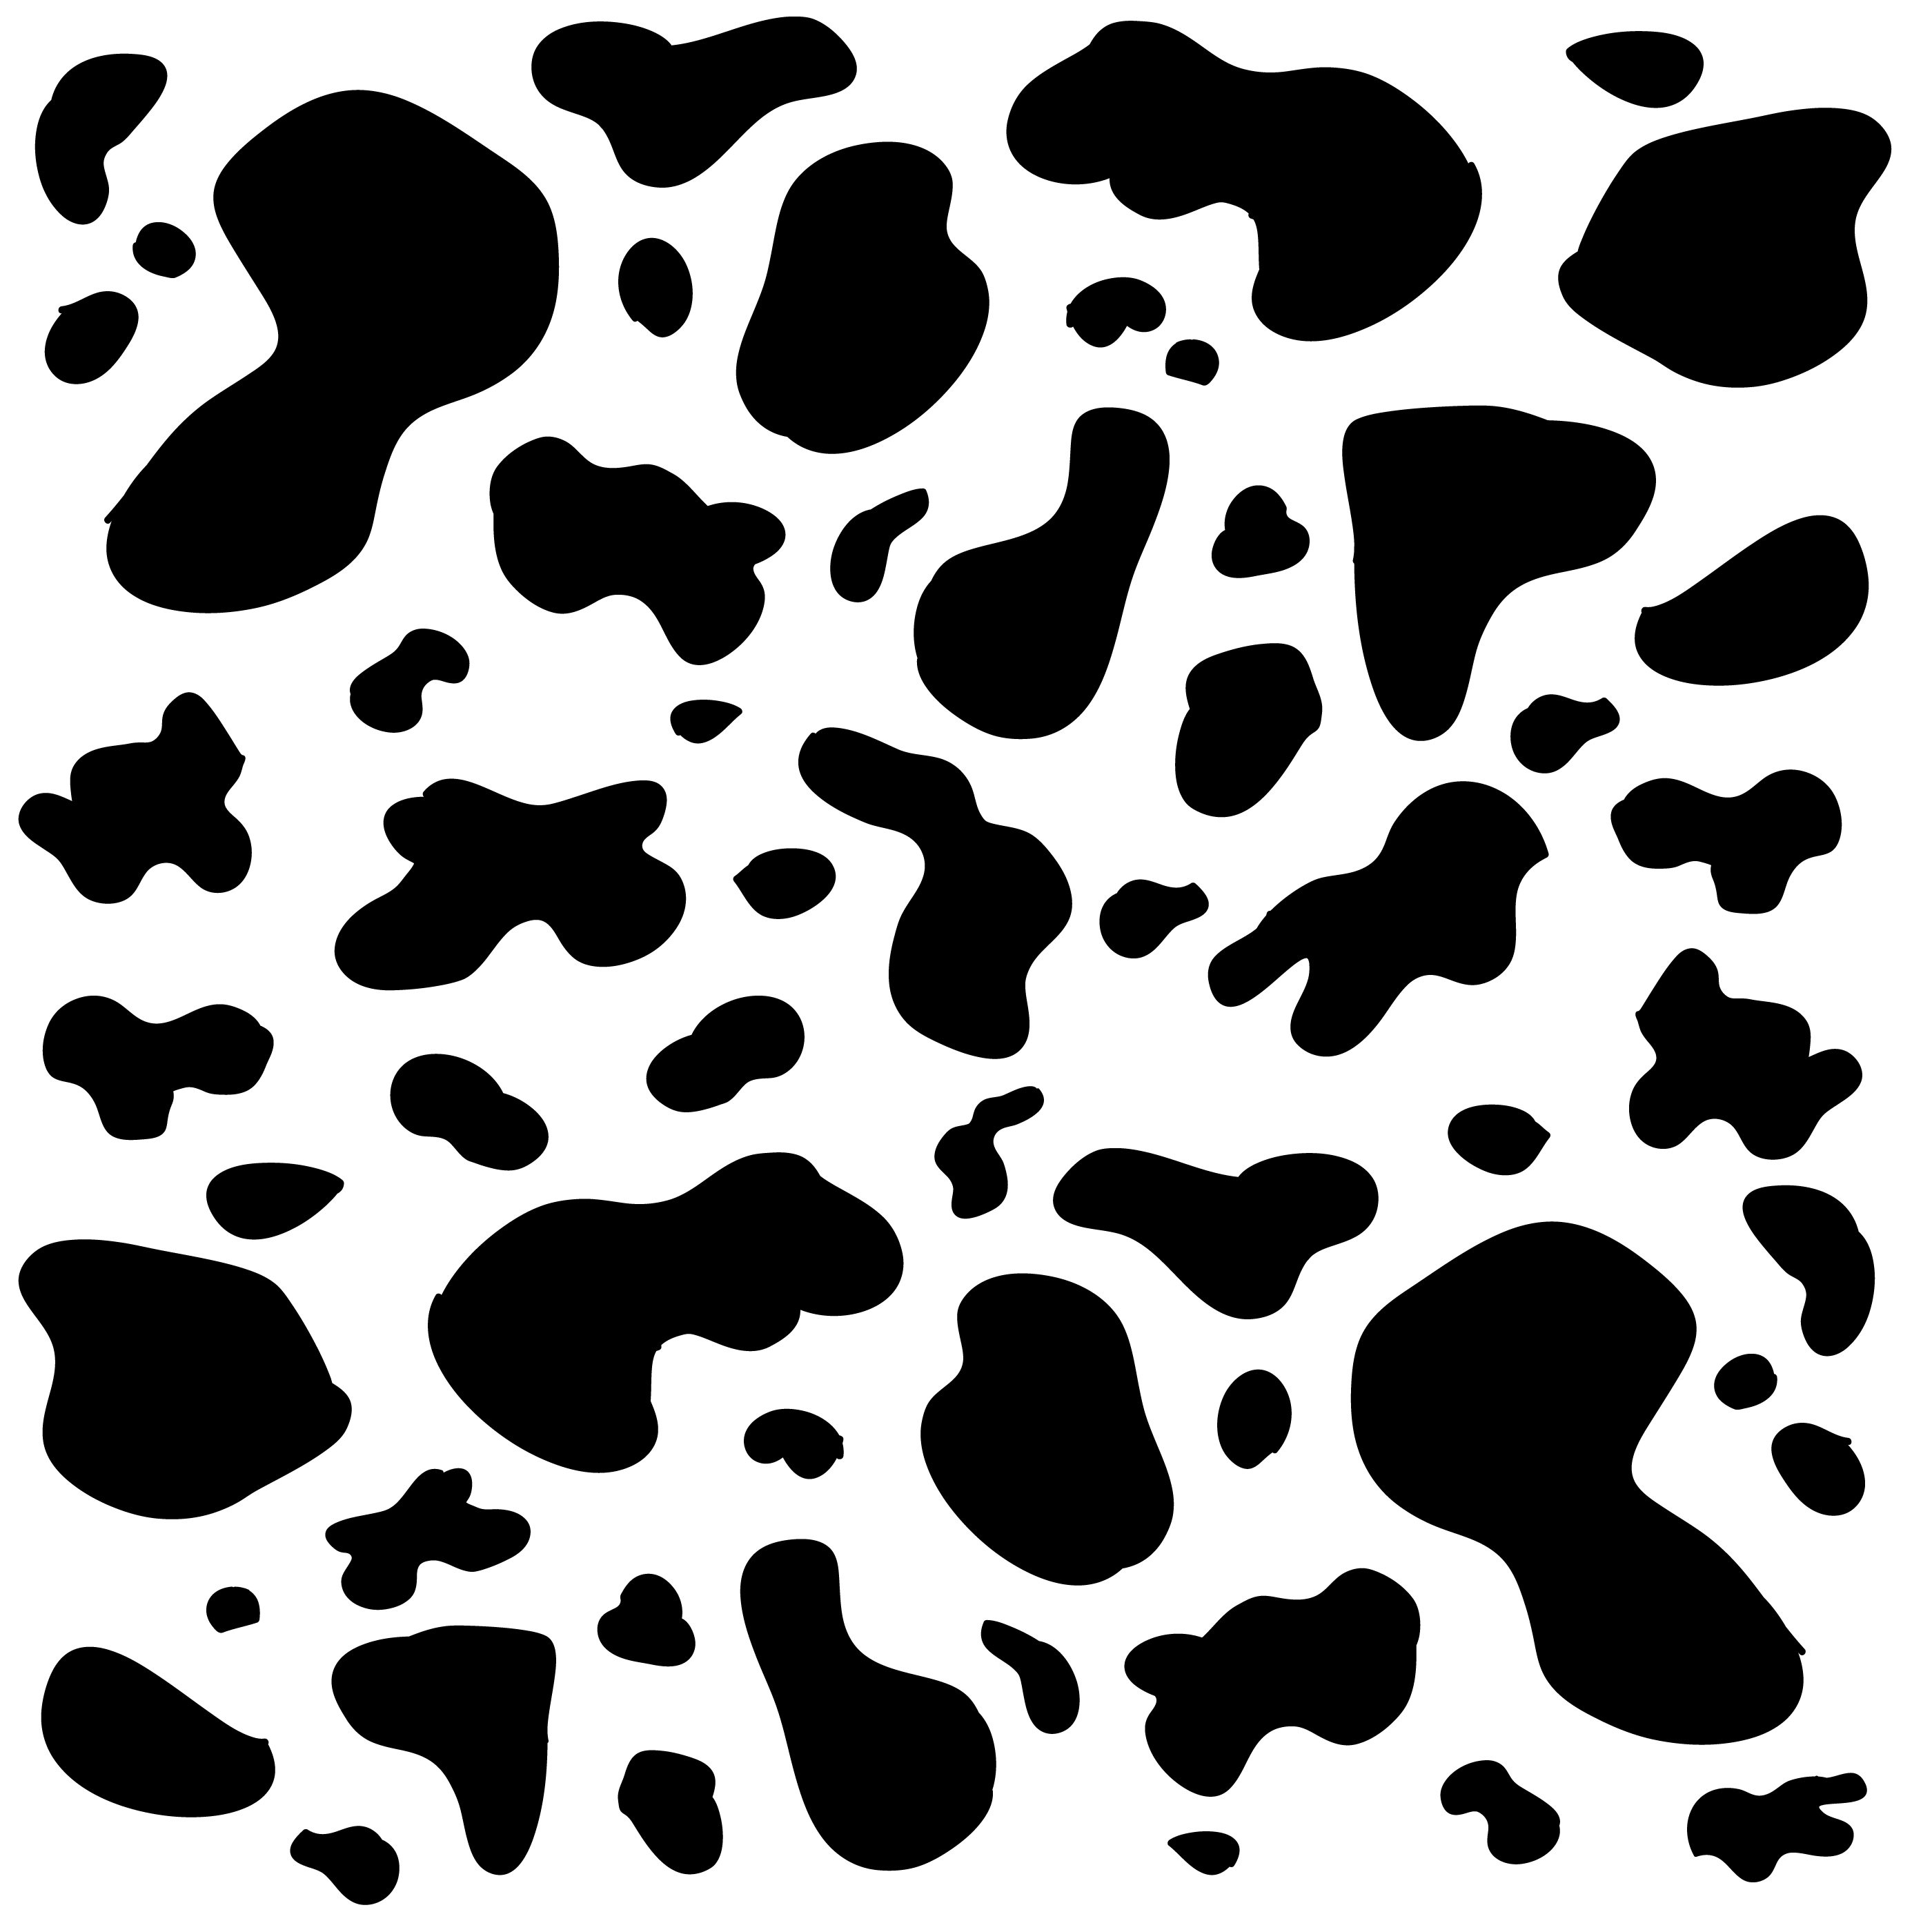 Browse 65,609 incredible Animal Print vectors, icons, clipart graphics, and...